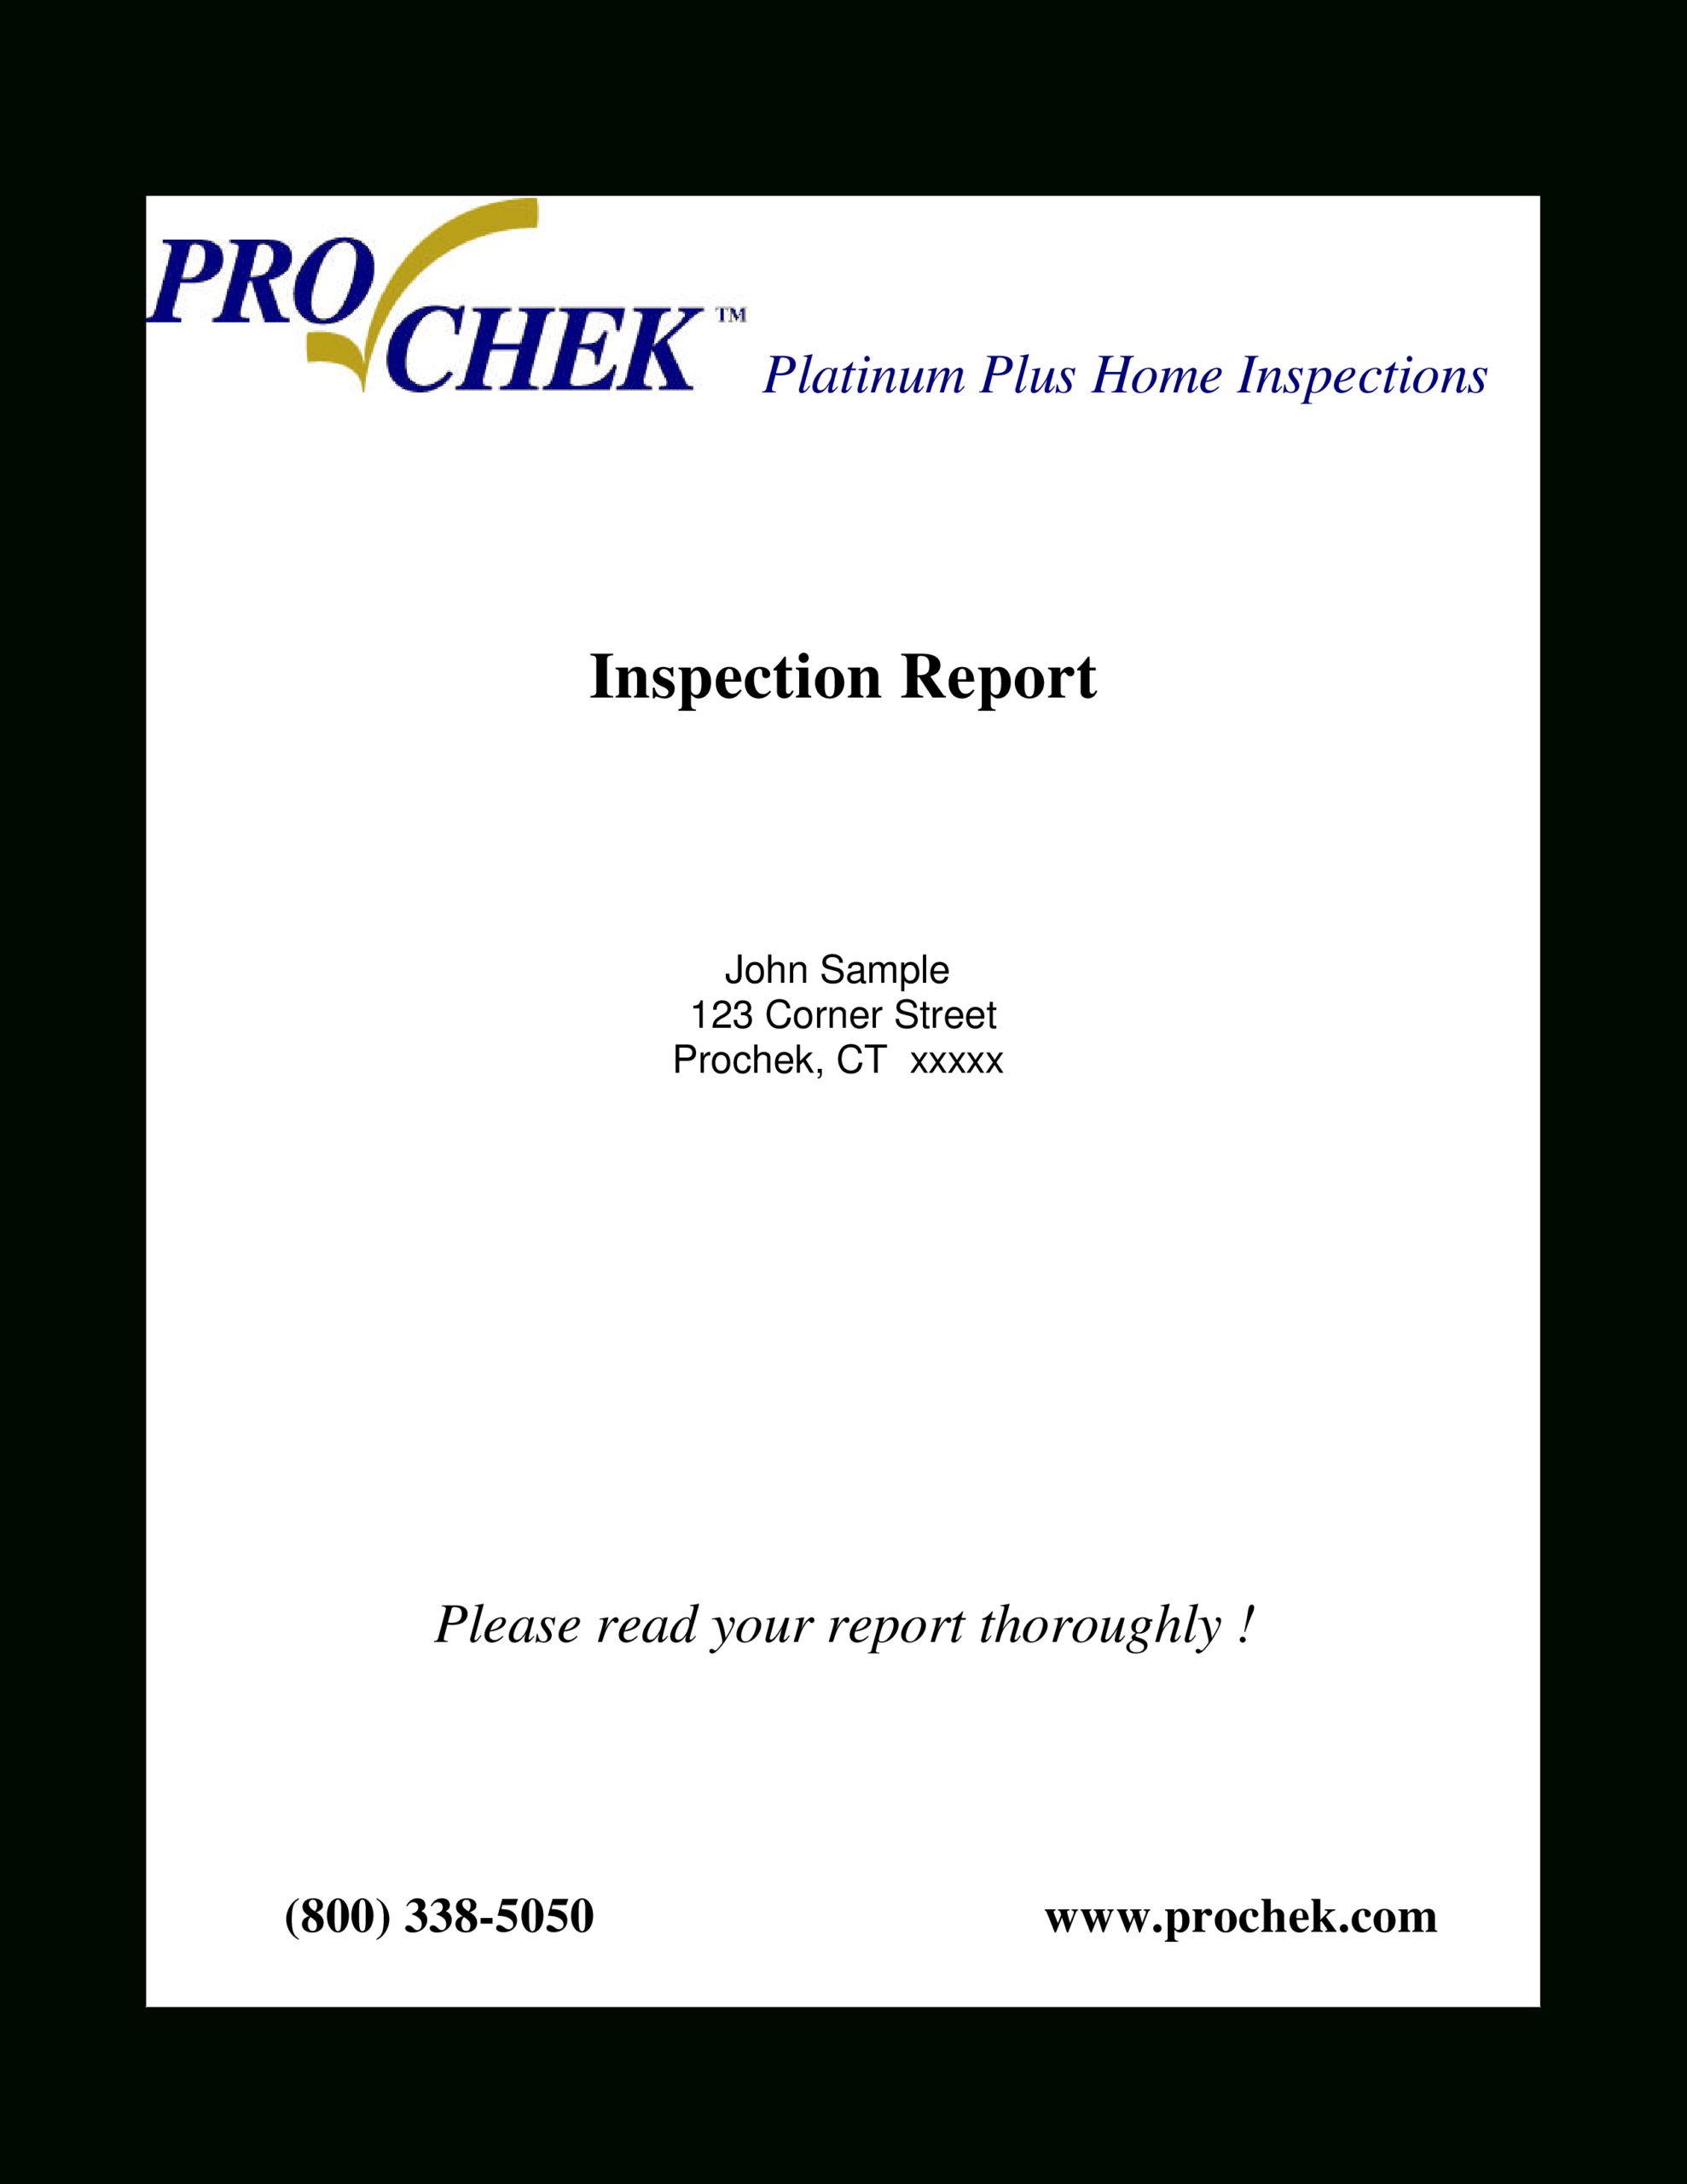 Home Inspection Report | Templates At Allbusinesstemplates Pertaining To Home Inspection Report Template